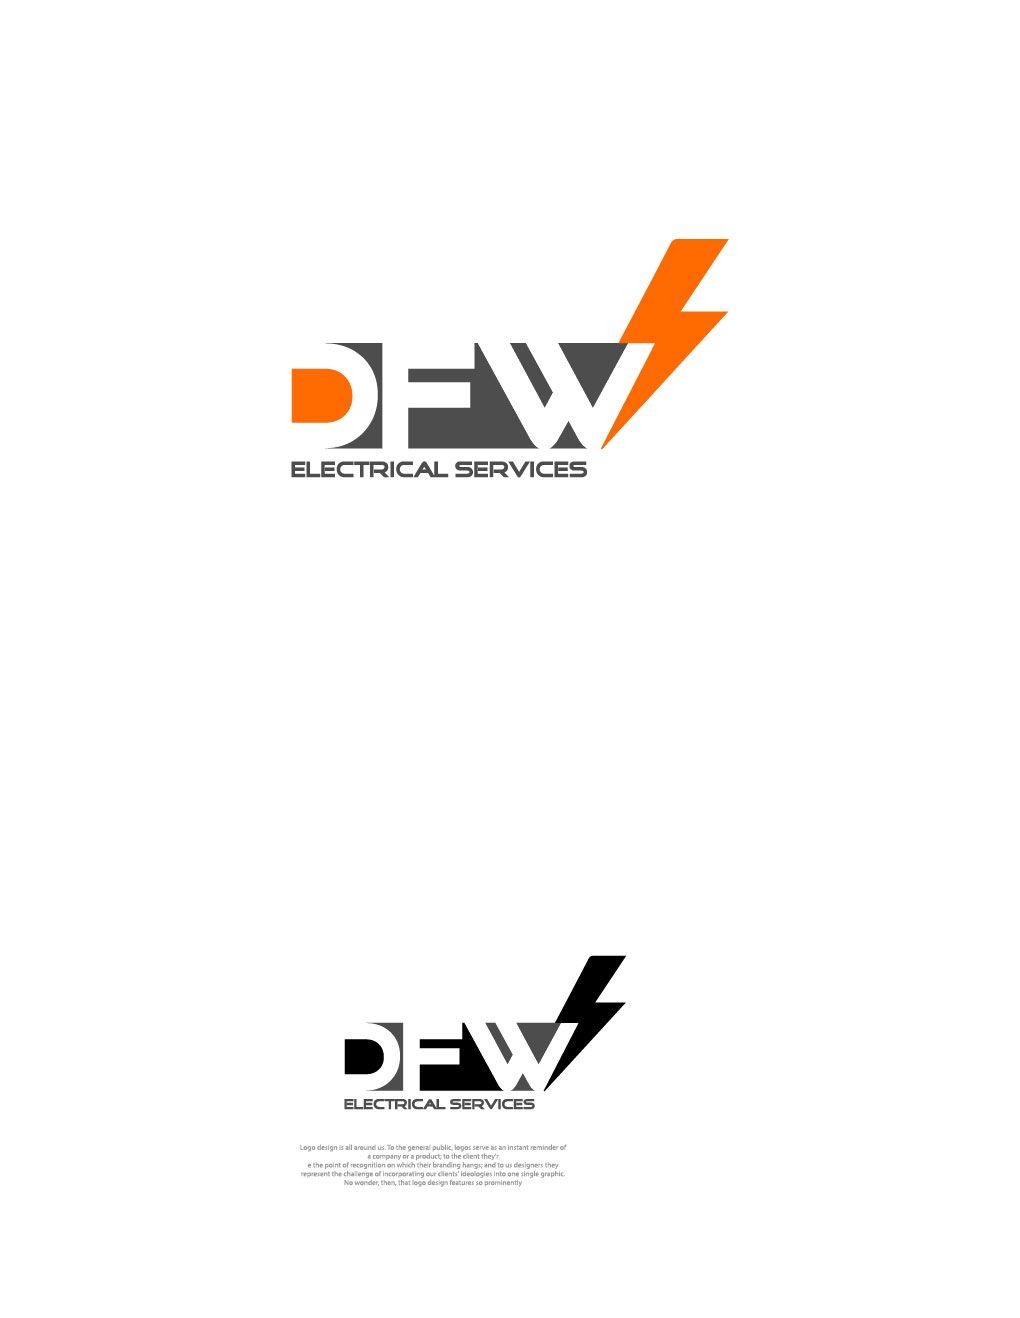 DFW Logo - Masculine, Conservative, Electrical Logo Design for DFW Electrical ...